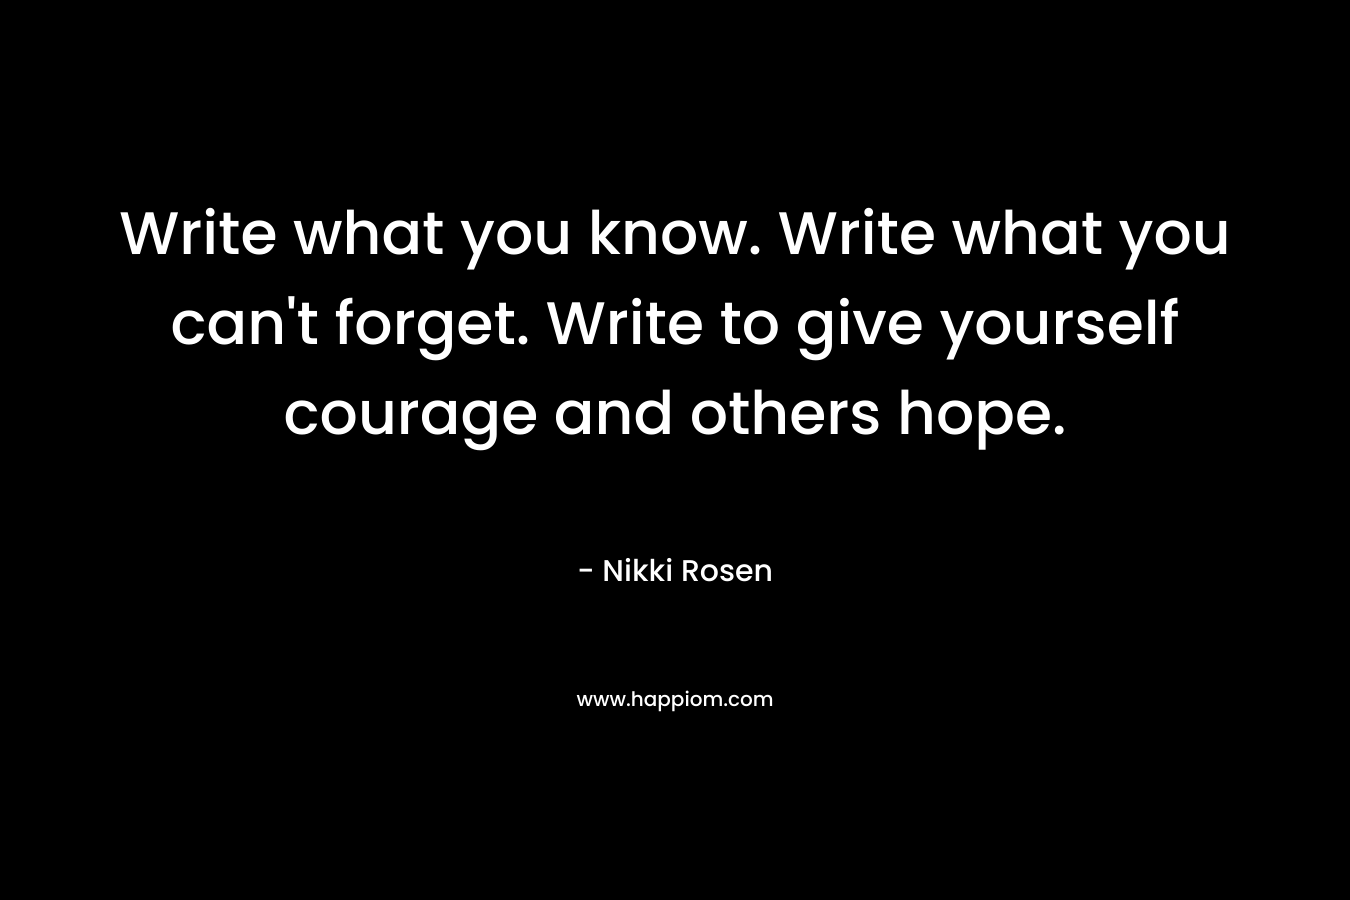 Write what you know. Write what you can’t forget. Write to give yourself courage and others hope. – Nikki Rosen